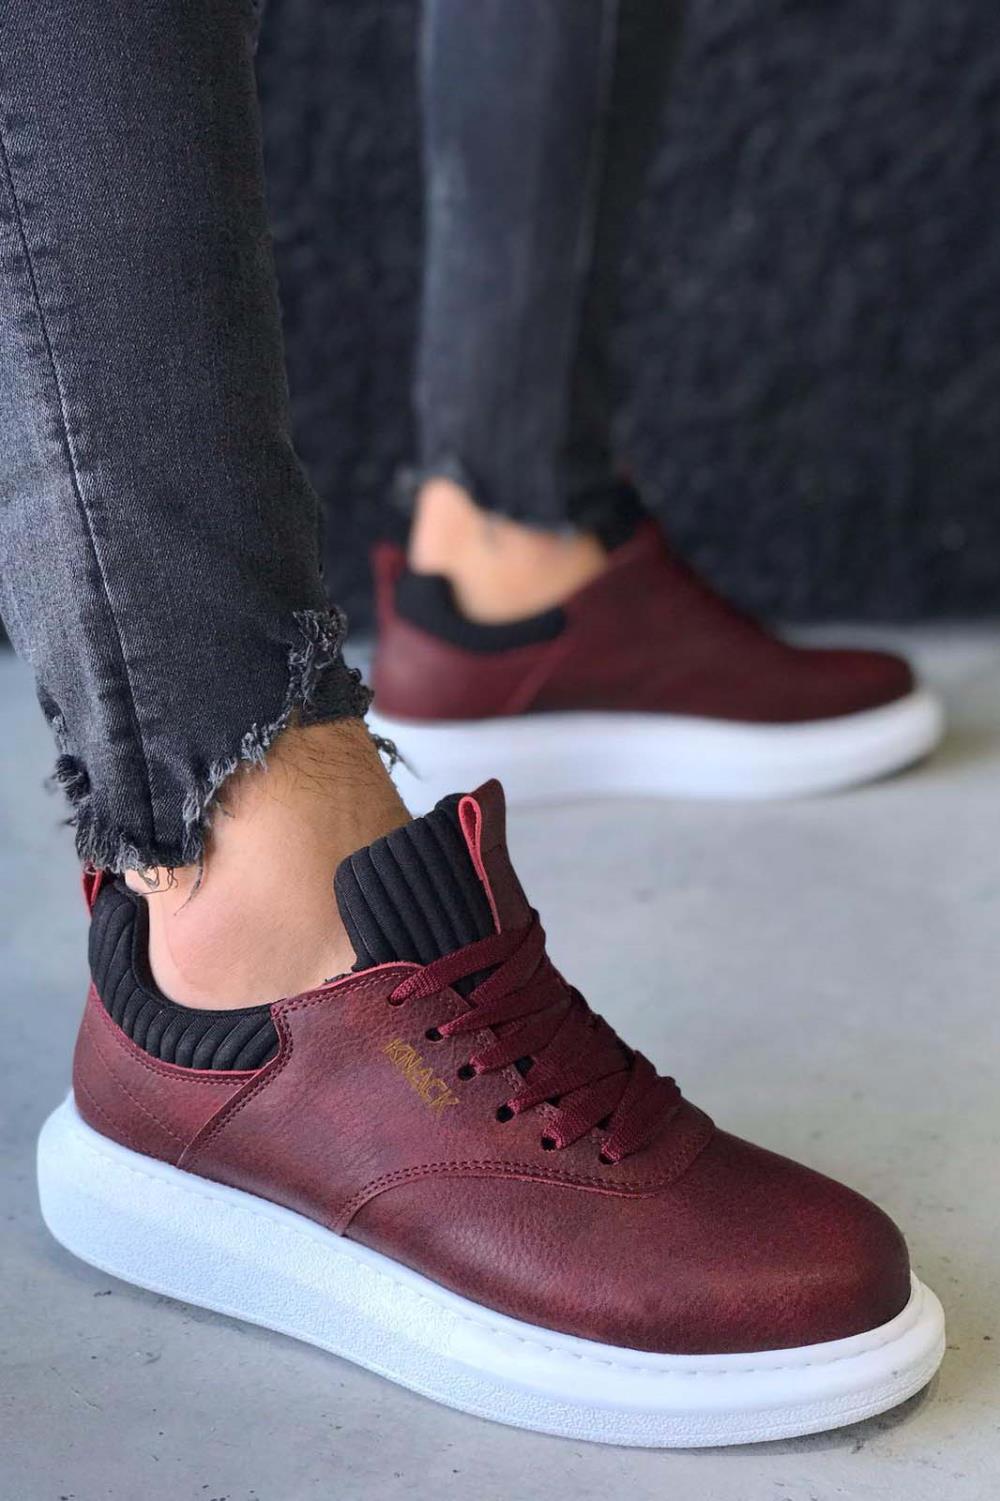 Men's Sneaker Claret Red Casual Sneaker Sports Shoes - STREETMODE ™